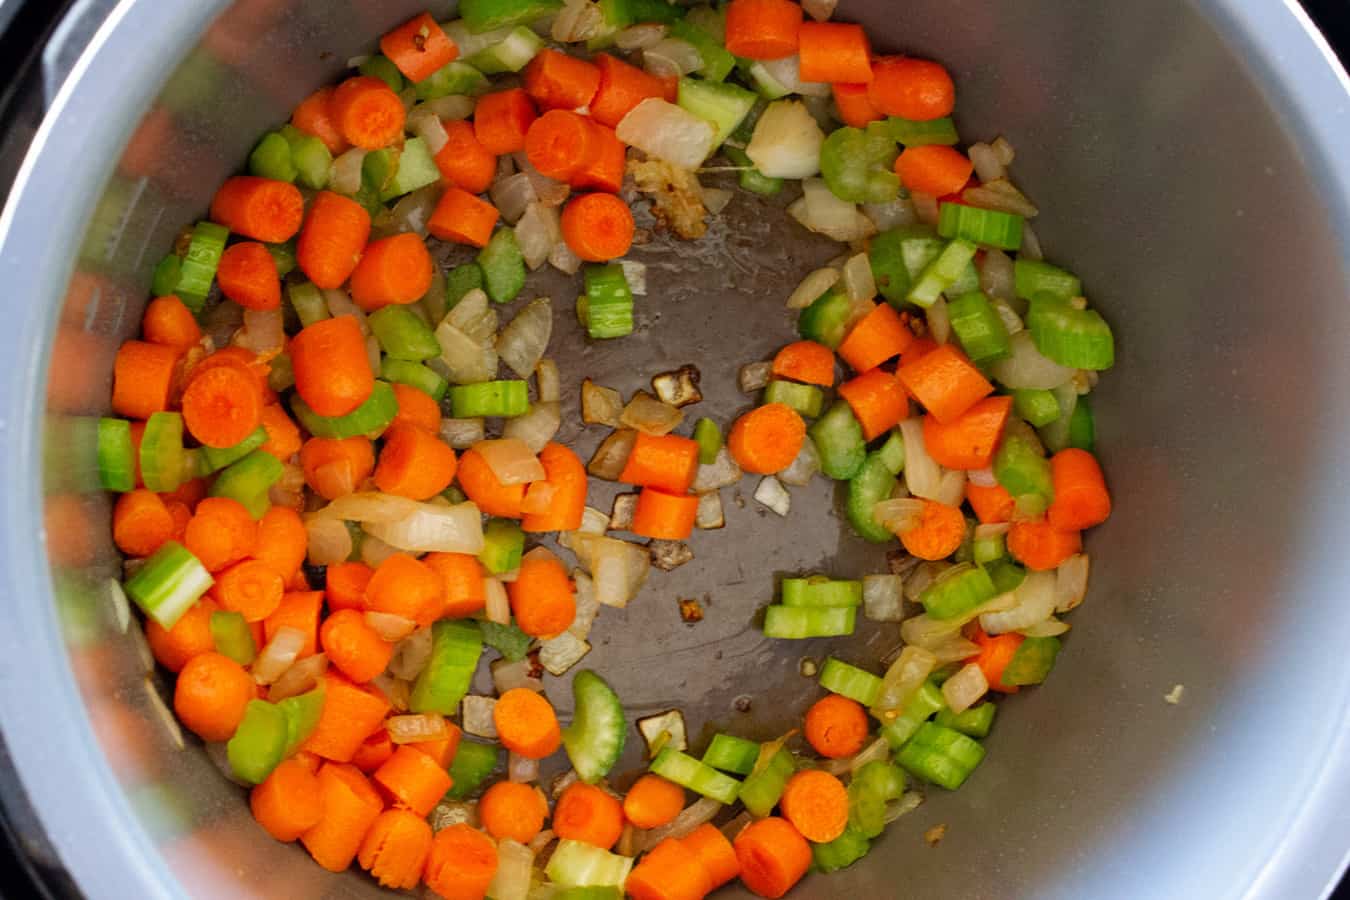 mirepoix of carrots, celery, and onion